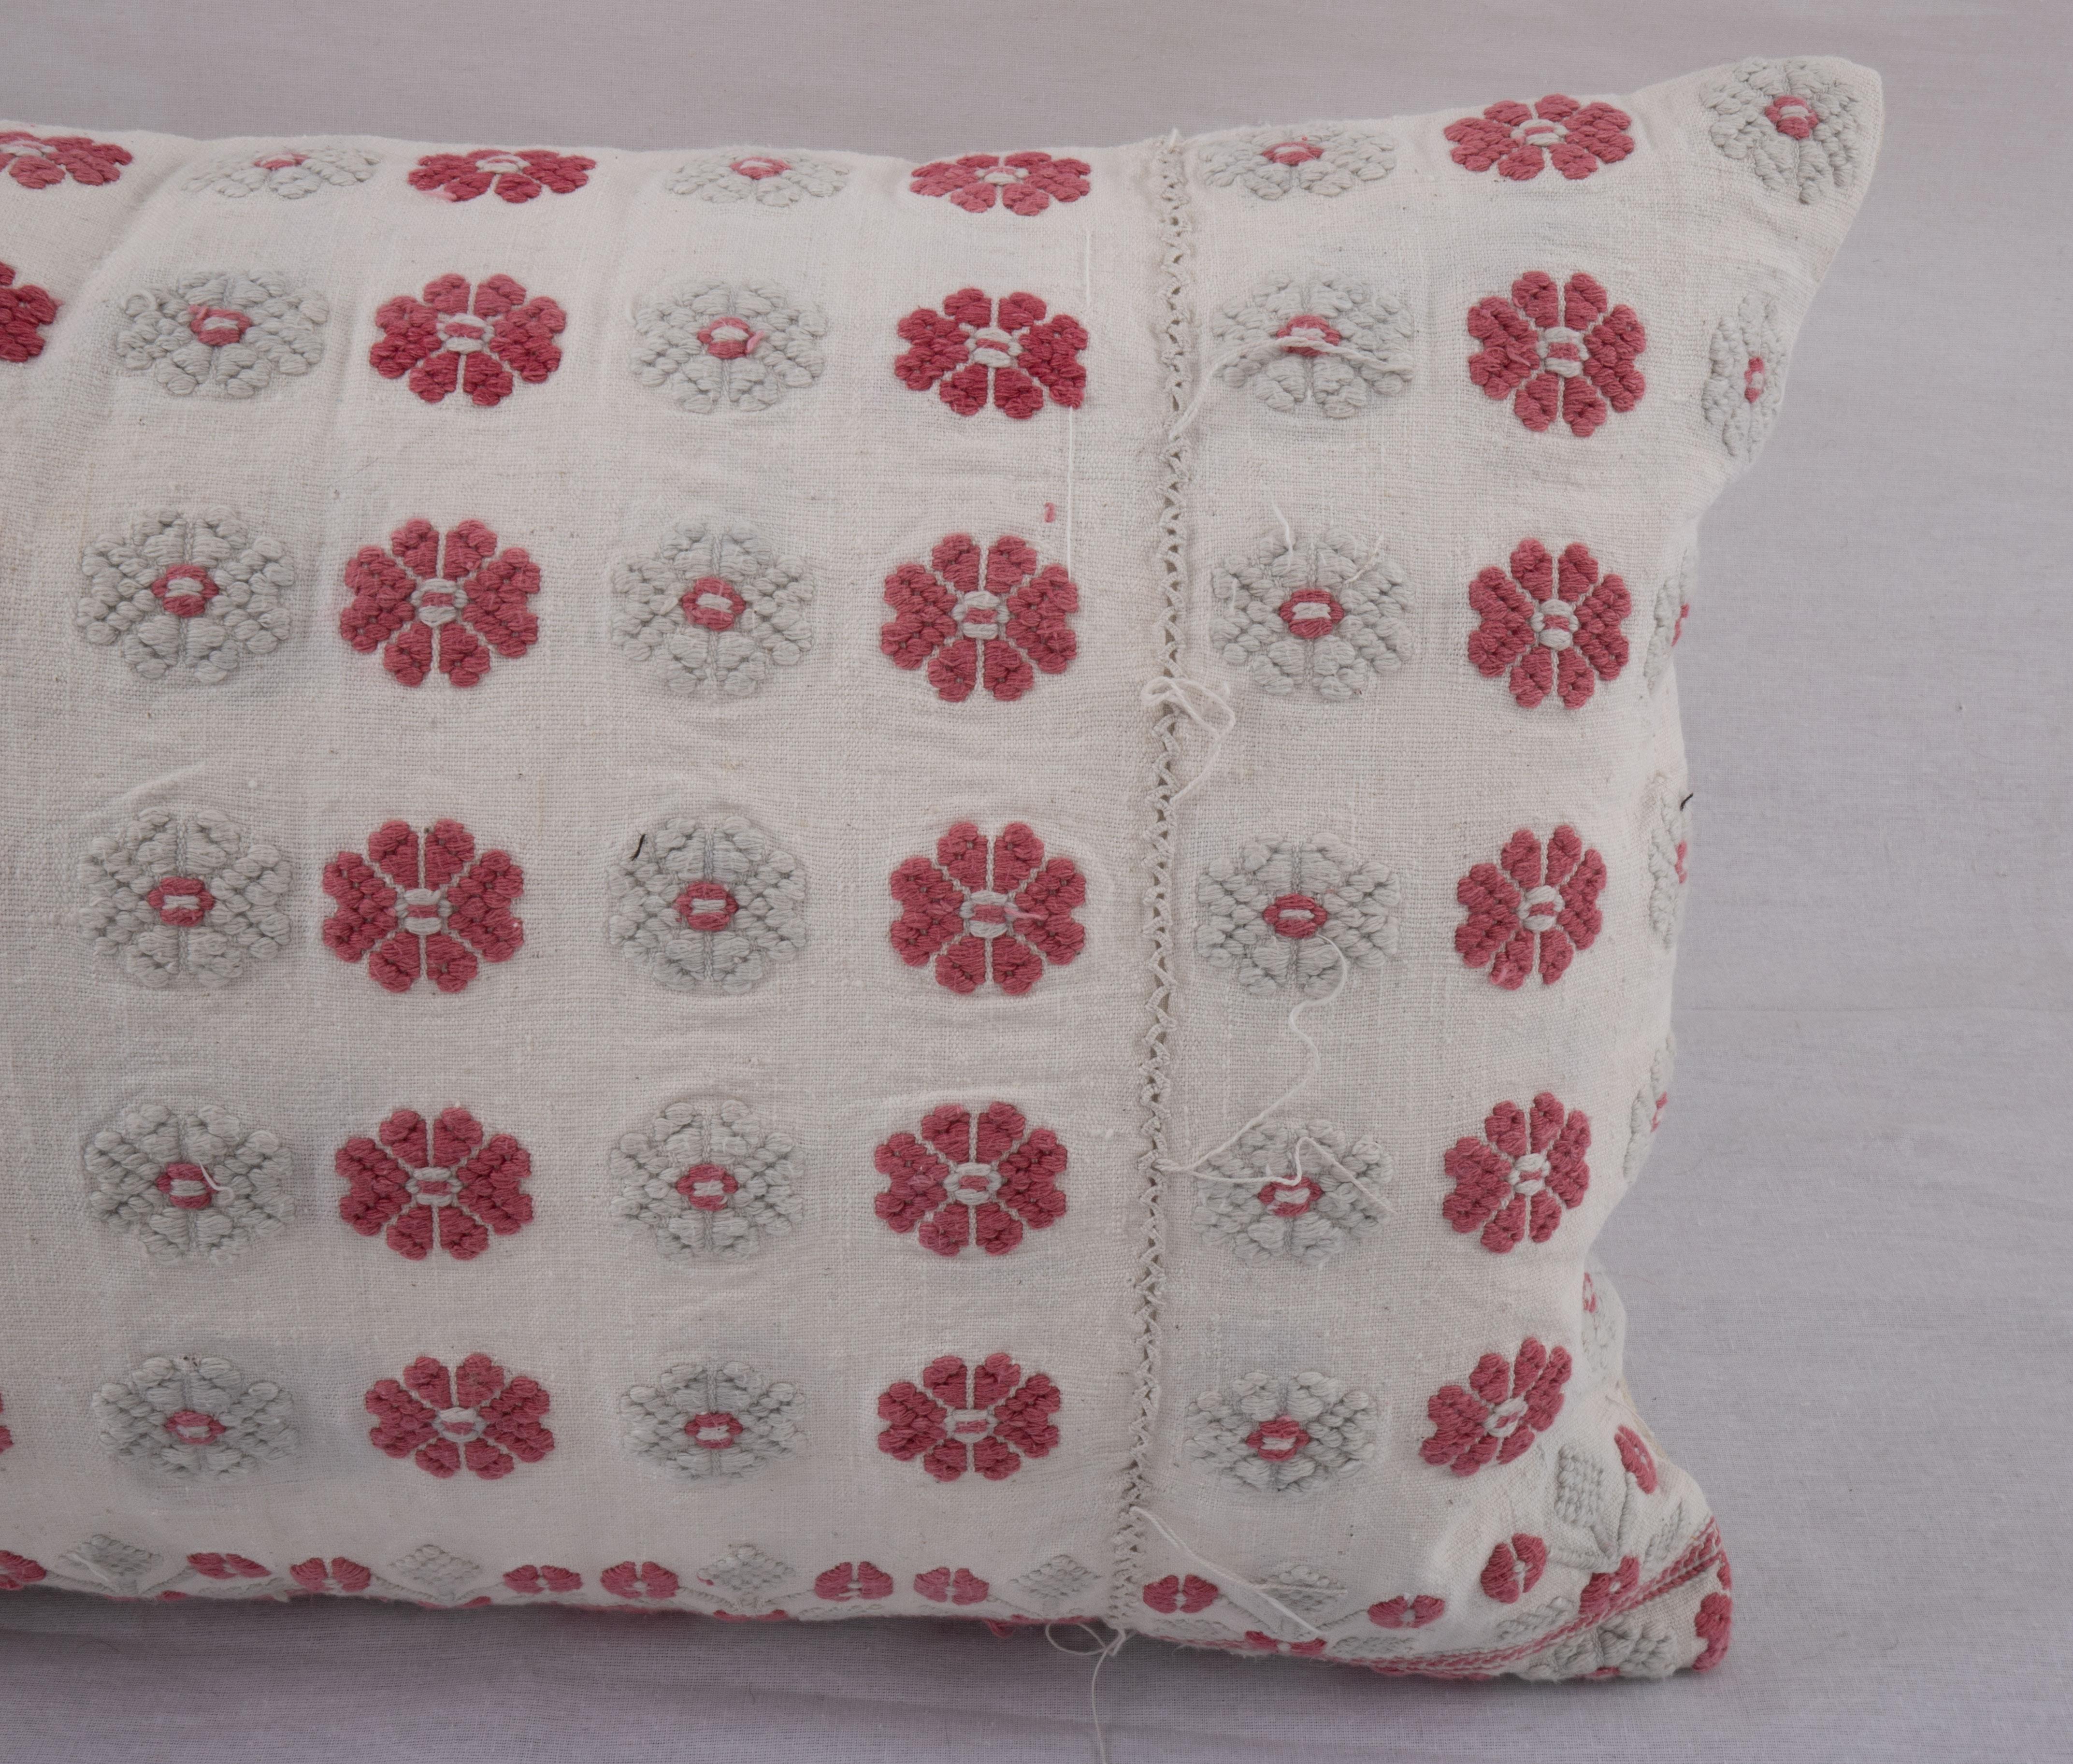 Turkish Pillow Cover Made from an Anatolian Embroidered Skirt, 2nd Quarter 20th C. For Sale